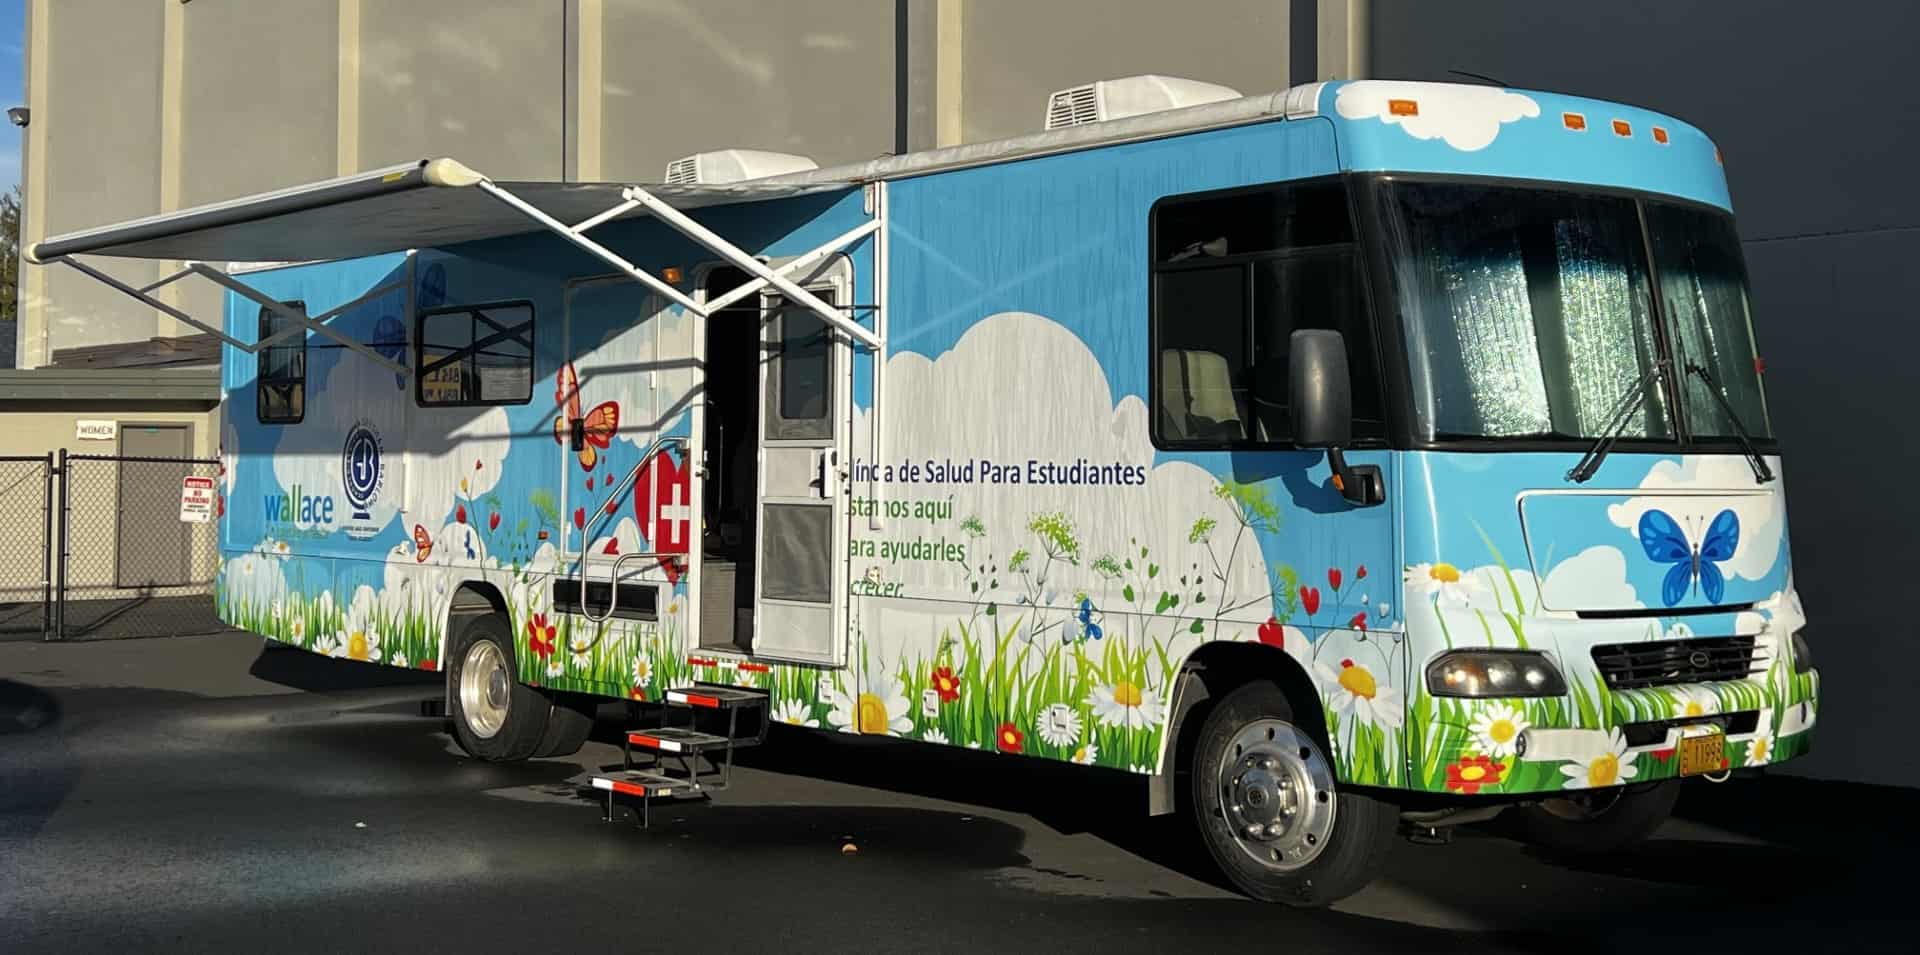 Mobile Clinic updated with Wallace design